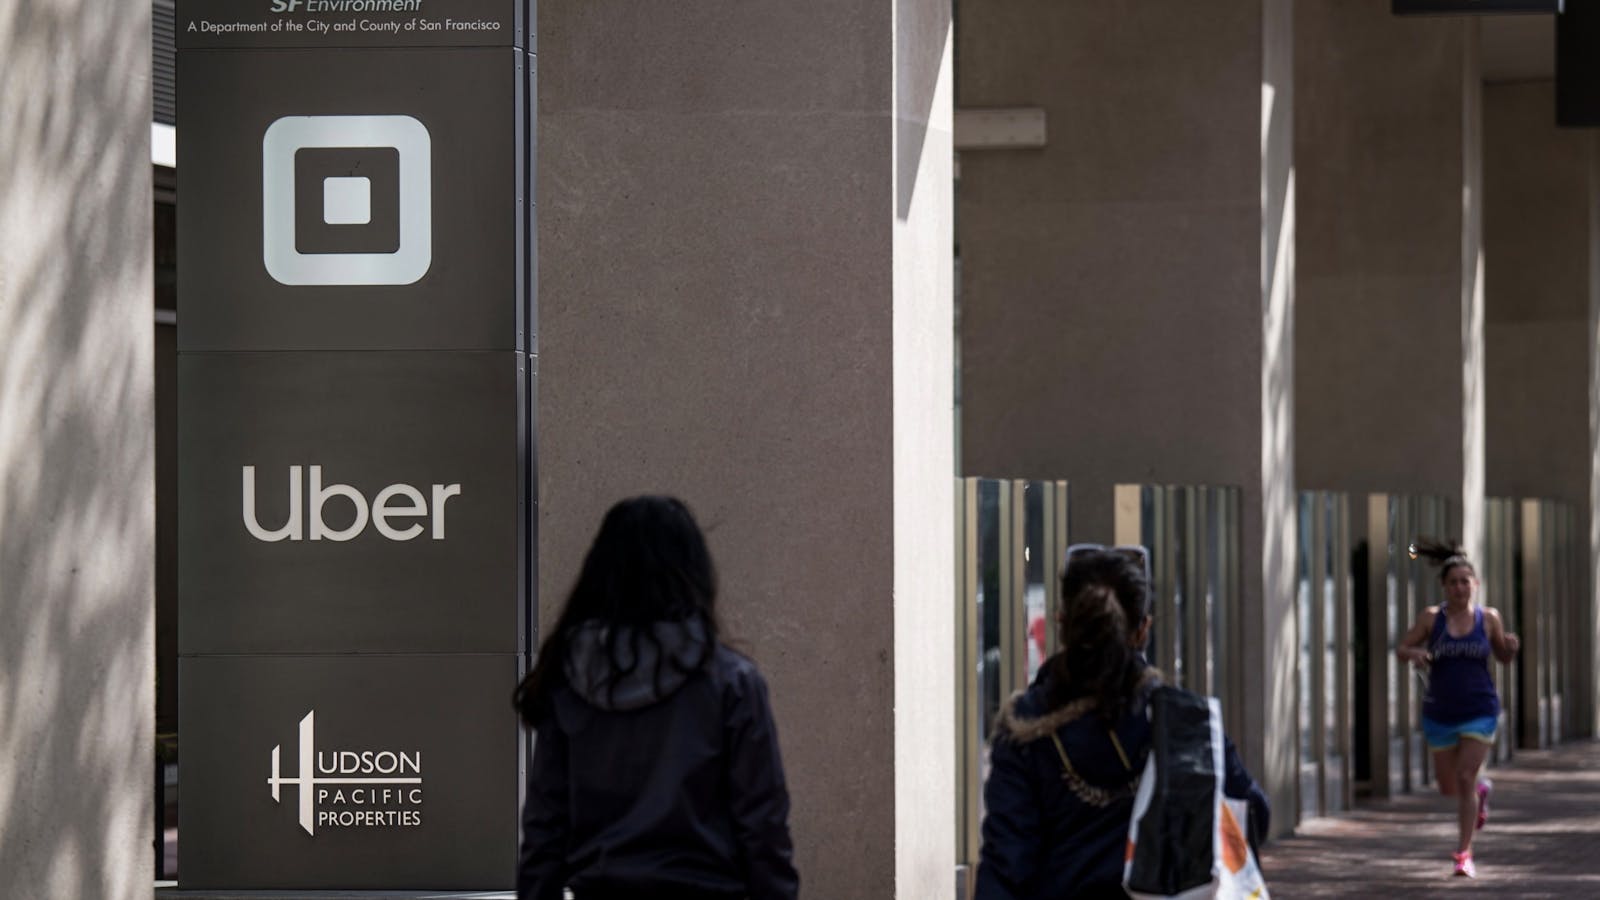 Uber's San Francisco headquarters. Photo by Bloomberg